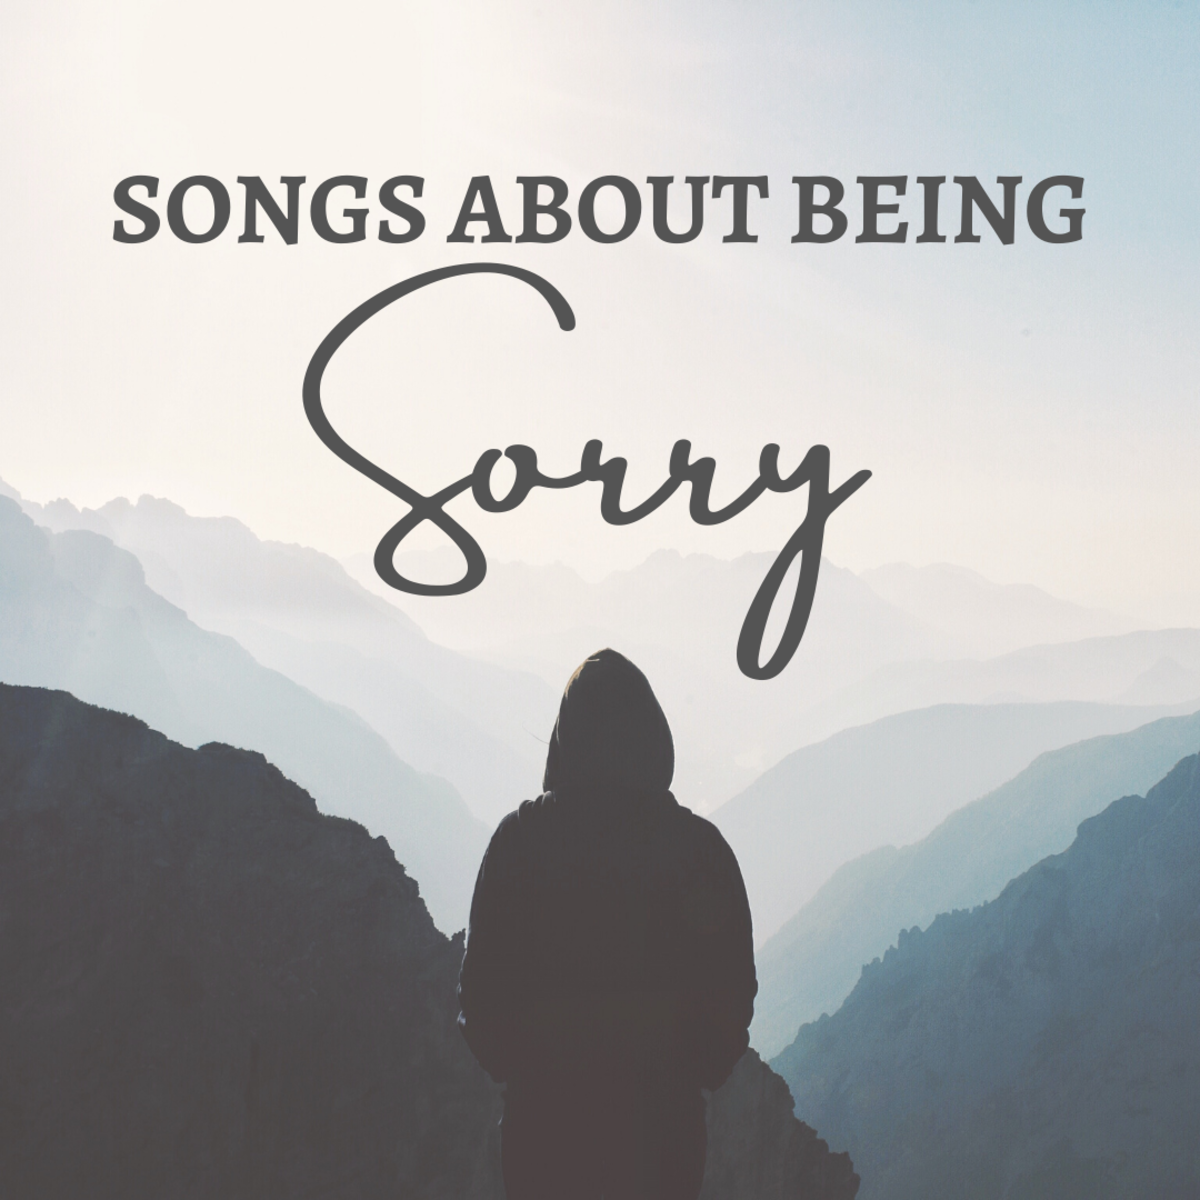 100 Best Songs With “Sorry” in the Title